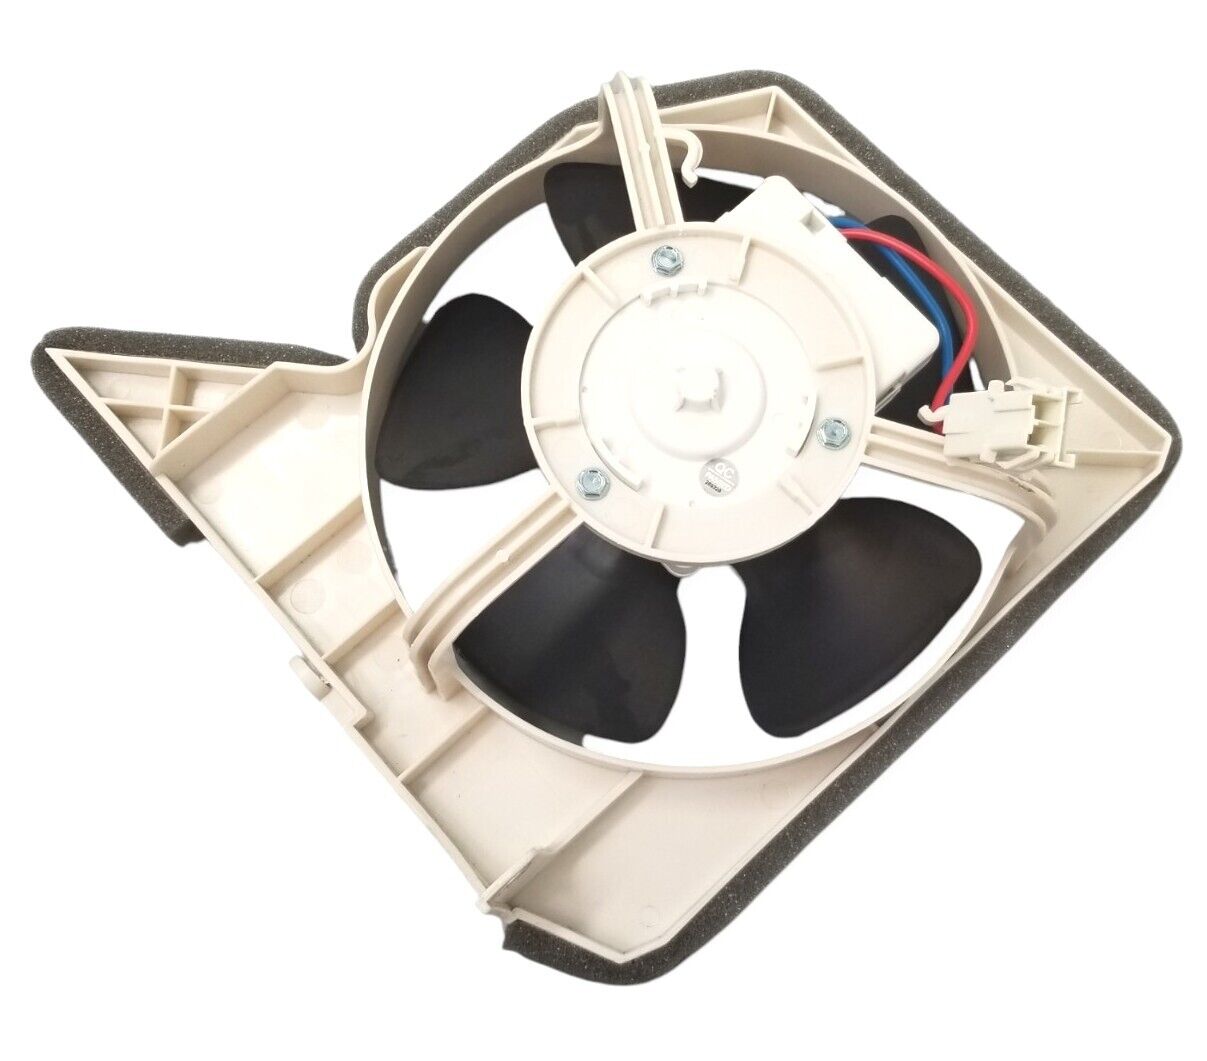 New OEM Replacement for Frigidaire Refrigerator Fan Motor 5304519734